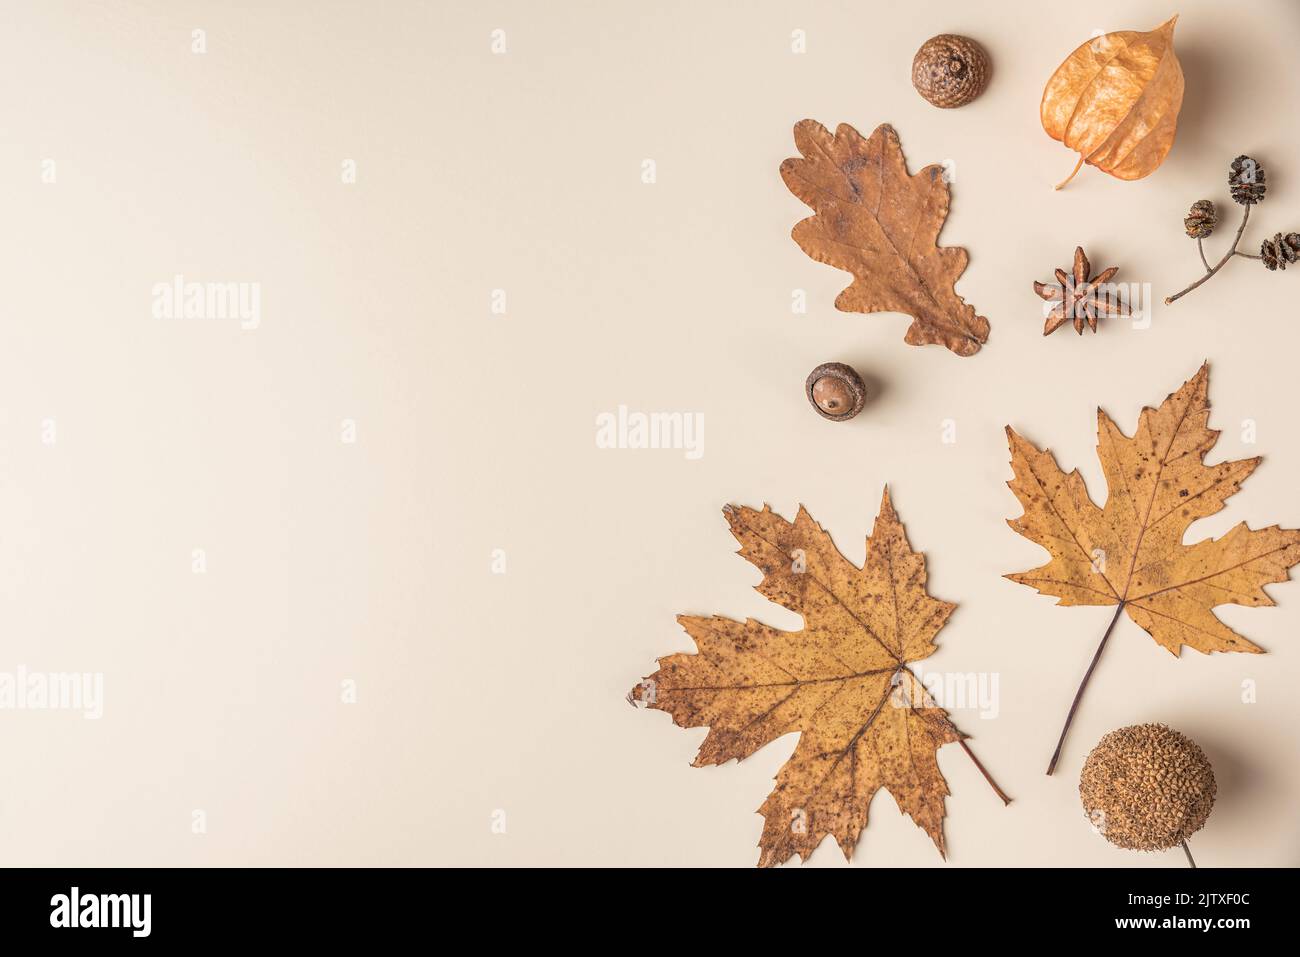 Autumn composition made of dry leaves, flowers, acorn, pine cone, anise star on beige background. Flat lay, top view with copy space Stock Photo